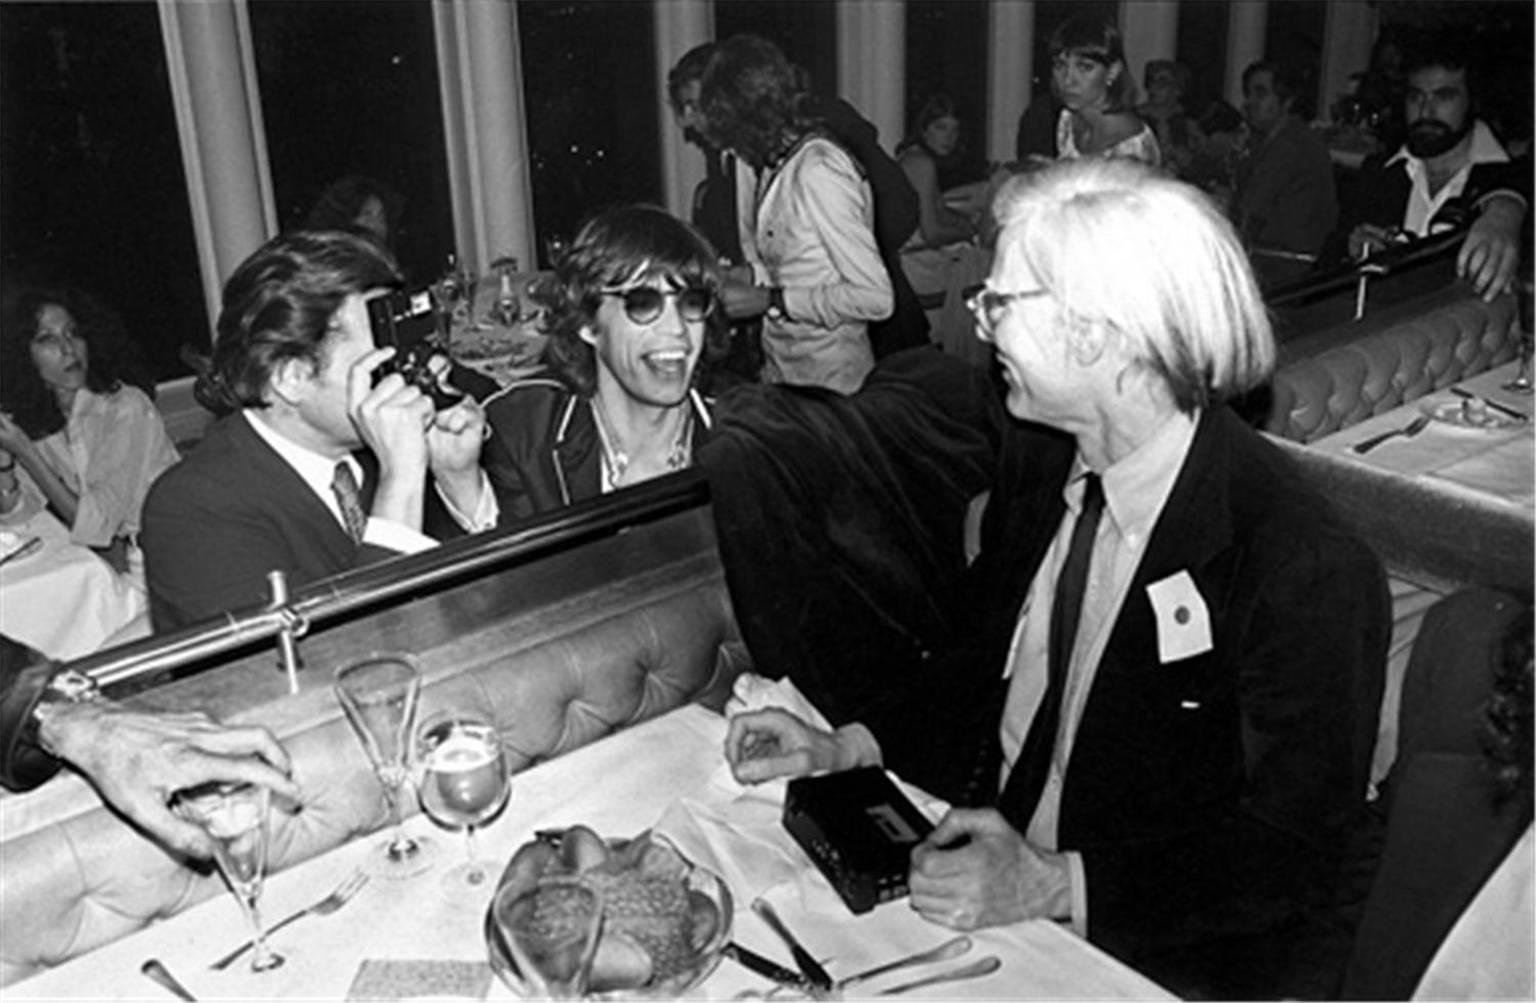 Mick Rock Black and White Photograph – Mick Jagger und Andy Warhol NYC, 1976